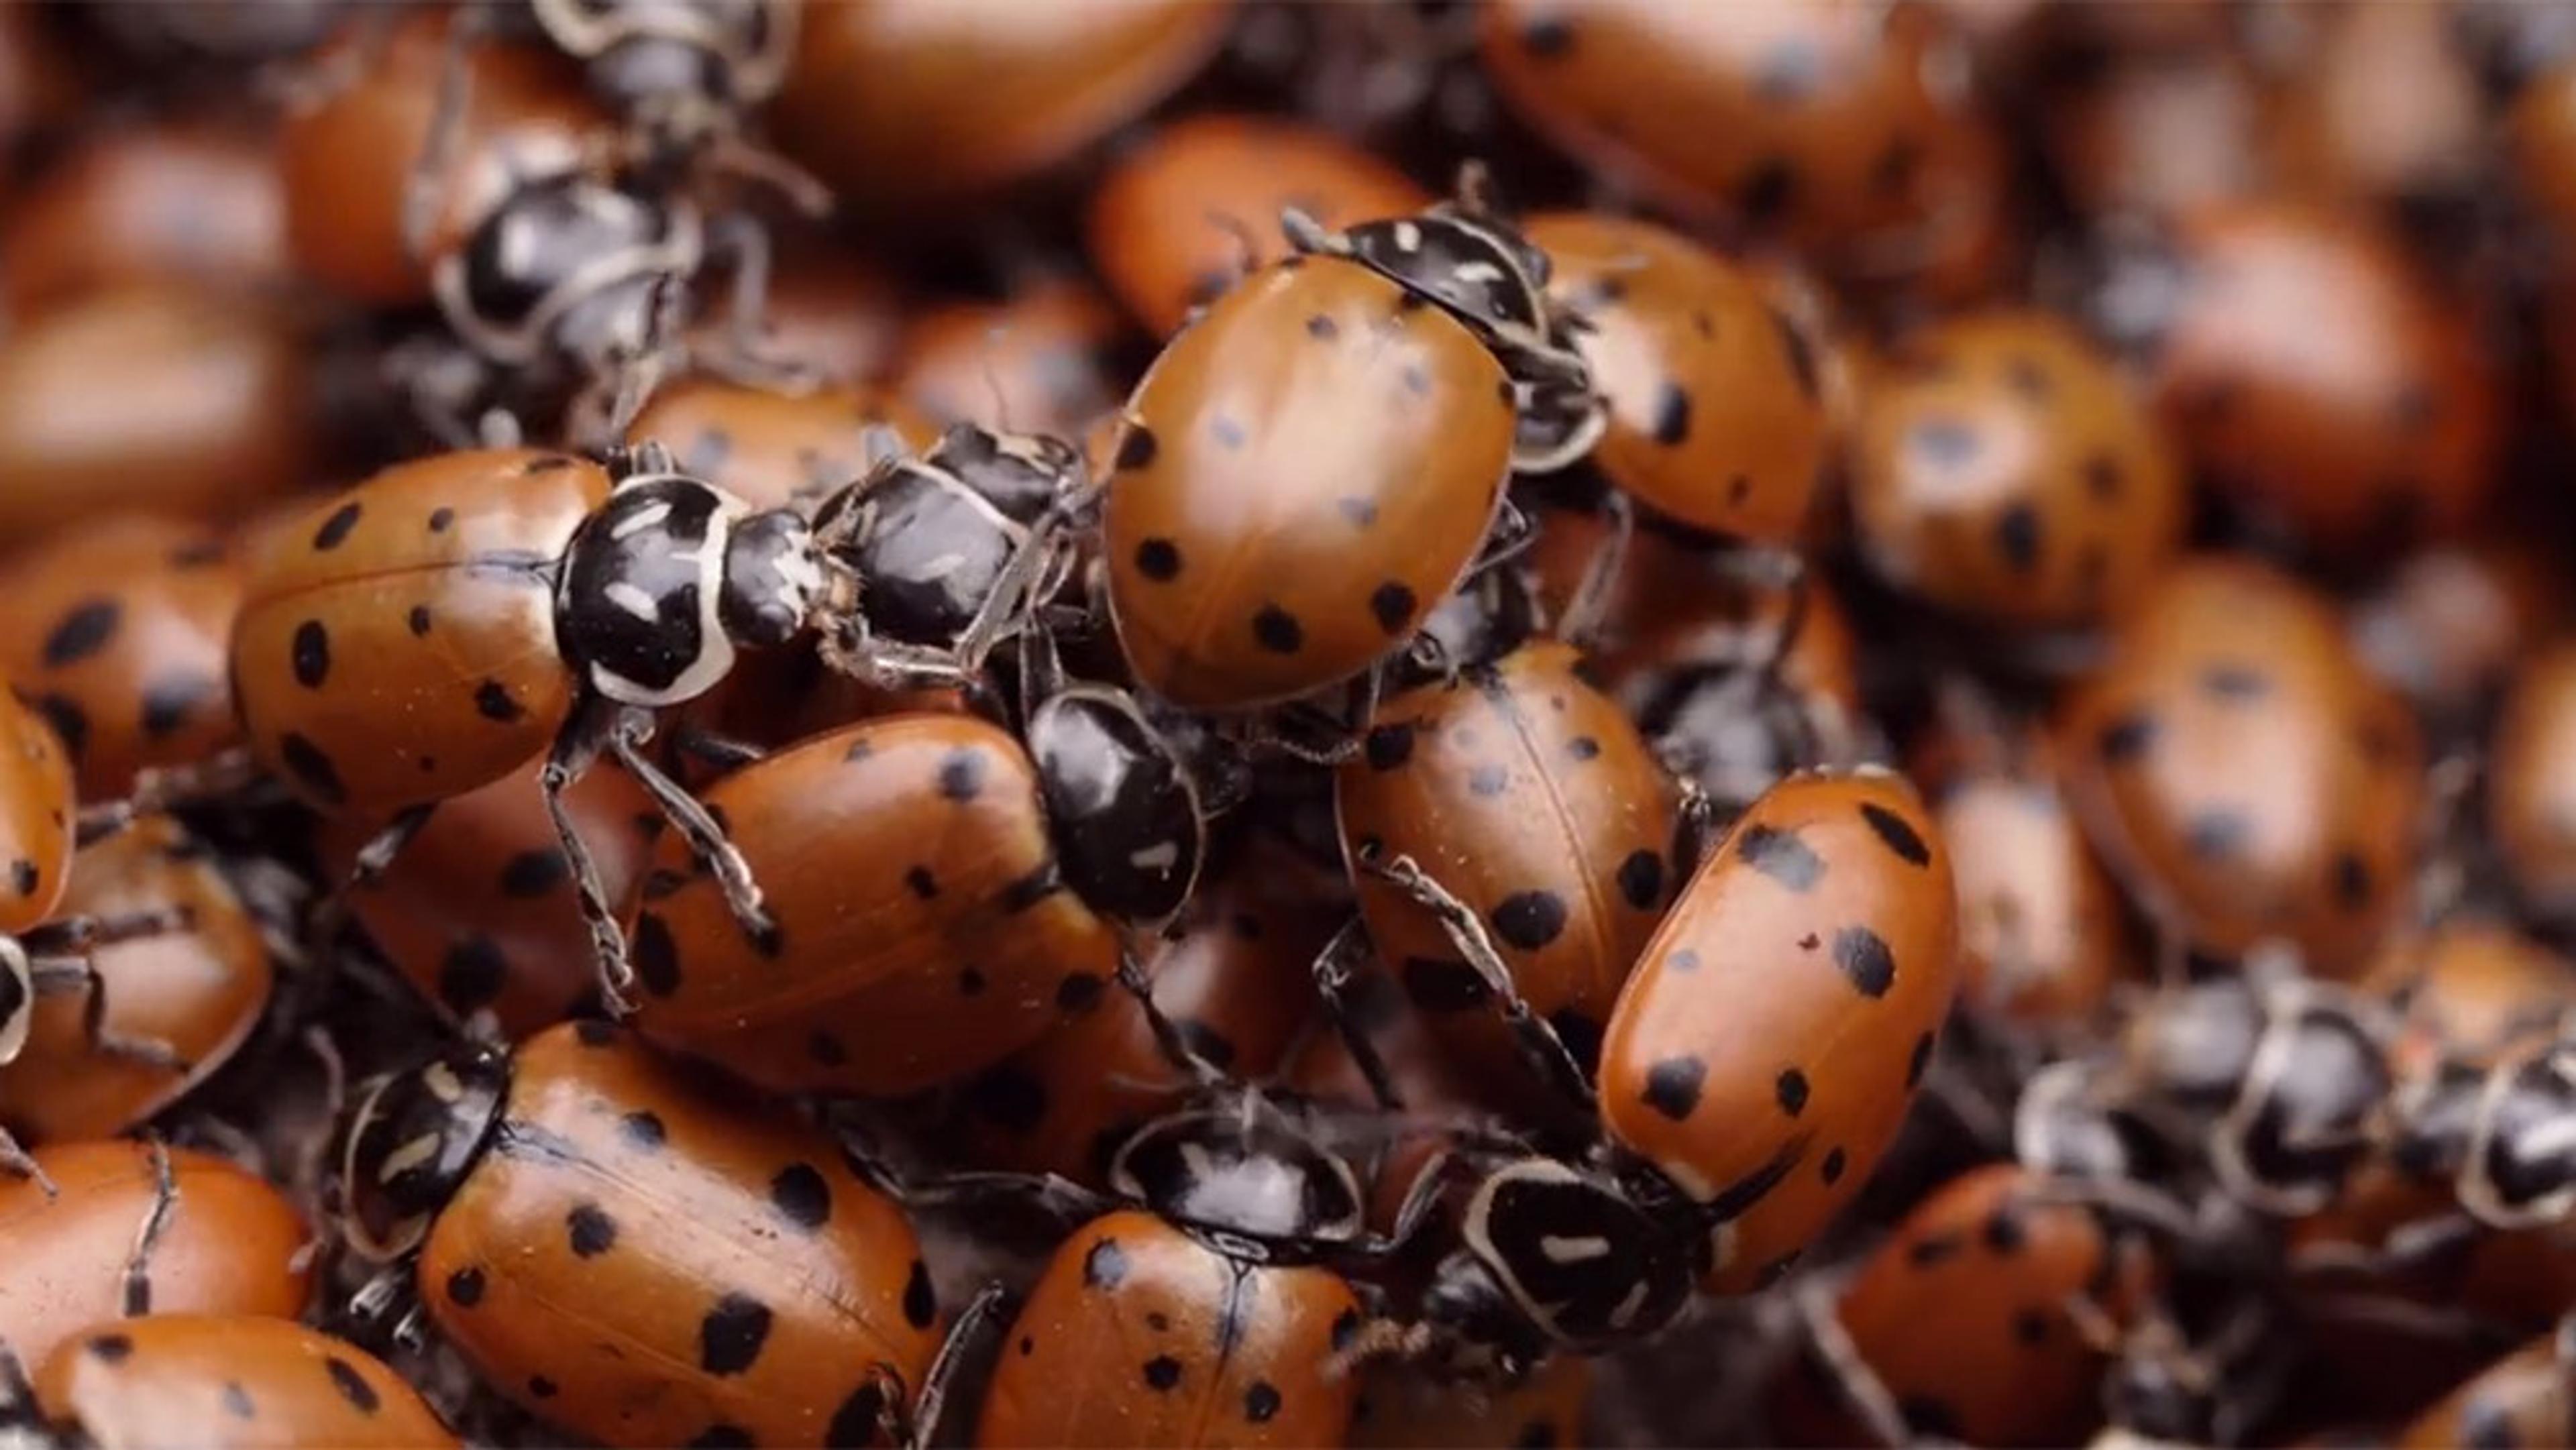 Did You Know Beetles Survive the Winter?